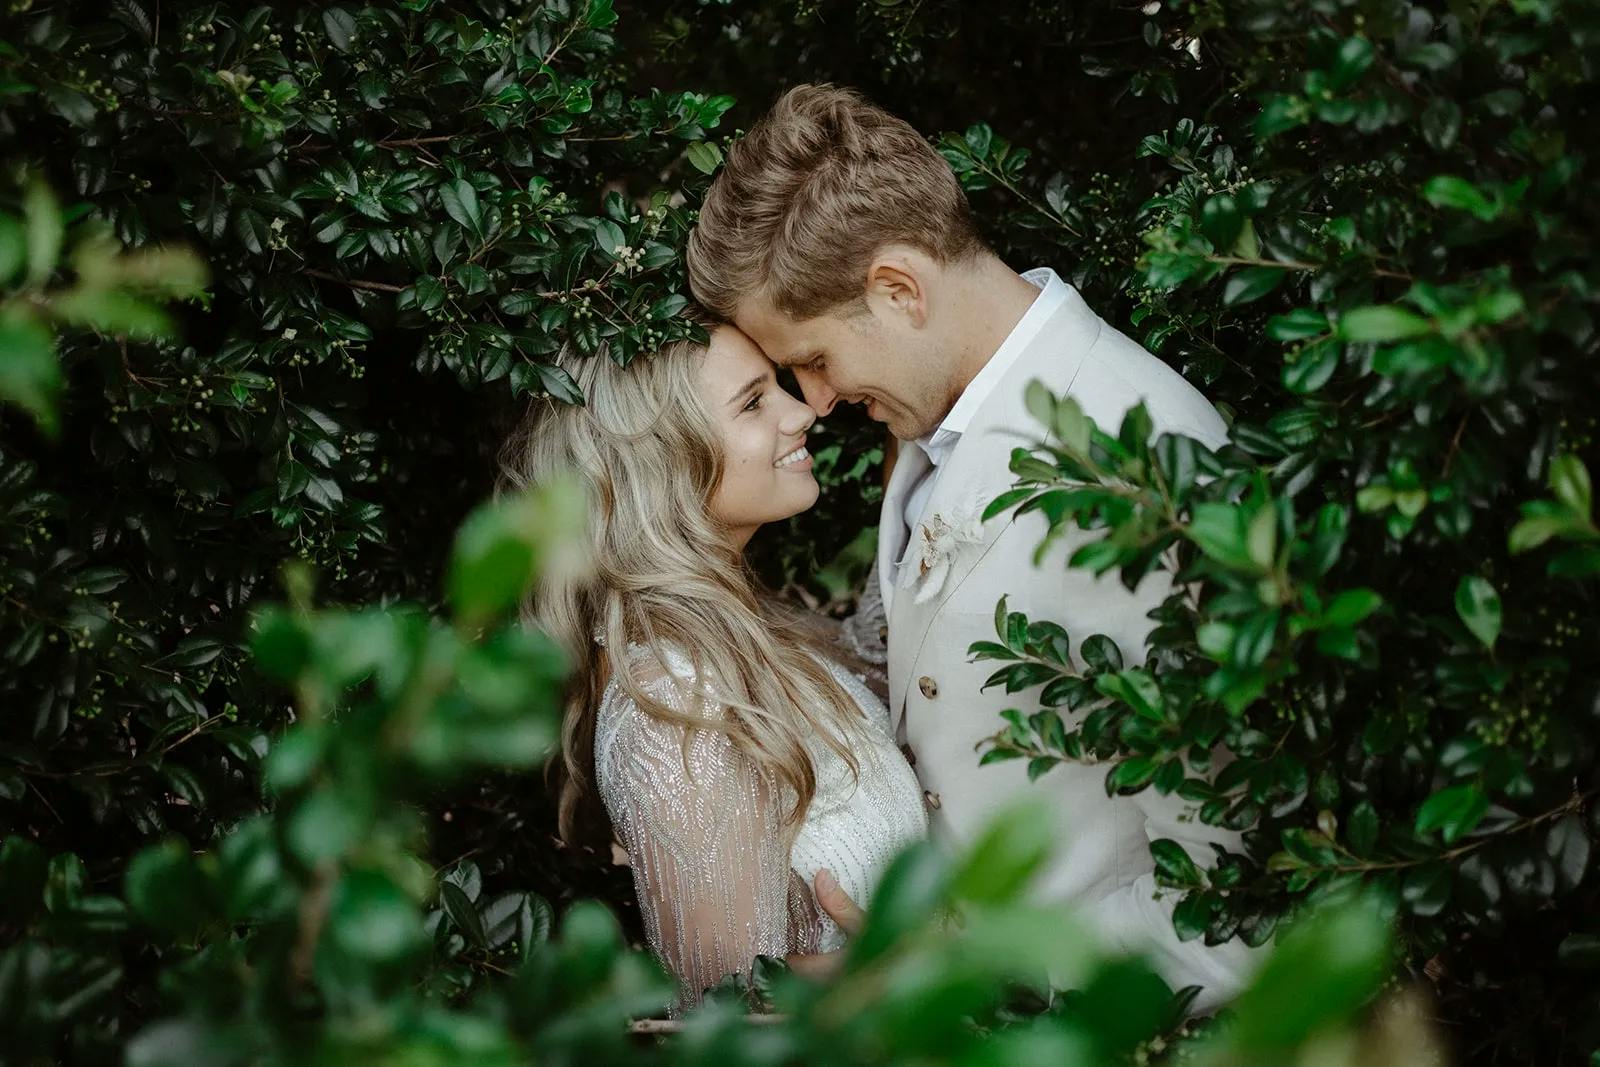 A couple shares an intimate moment, embraced among lush greenery. The woman, with long blonde hair, gazes lovingly at the man who is wearing a light-colored suit. The foliage surrounds them, creating a serene, romantic atmosphere.